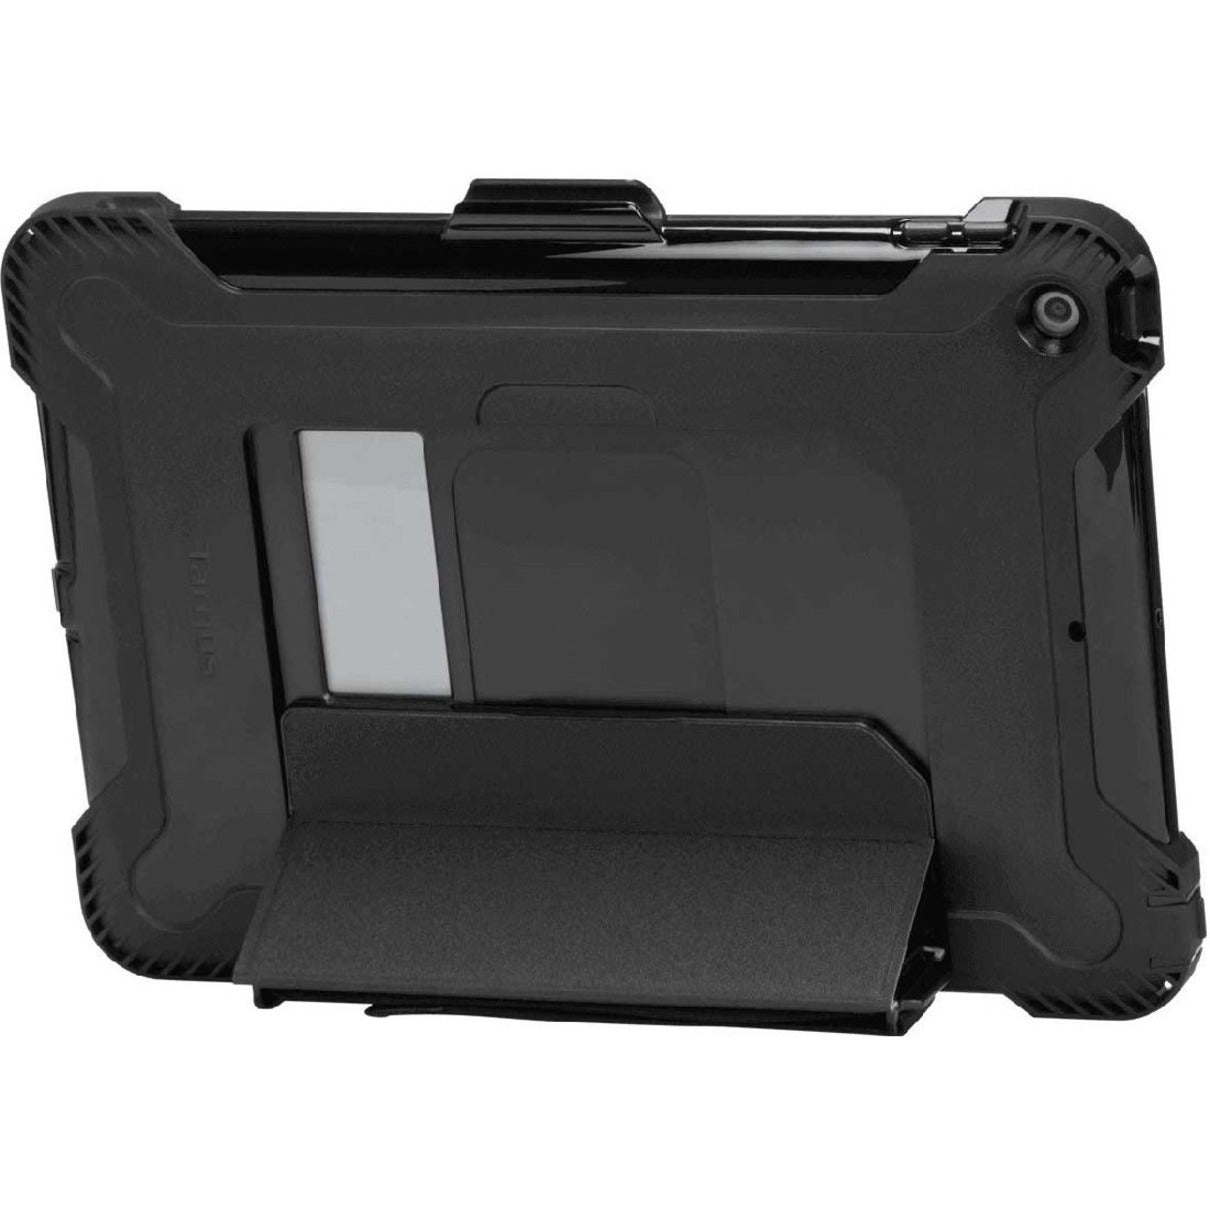 Targus SafePort Rugged Case for iPad (9th, 8th and 7th gen.) 10.2-inch (Black) (THD498GLZ) Alternate-Image1 image